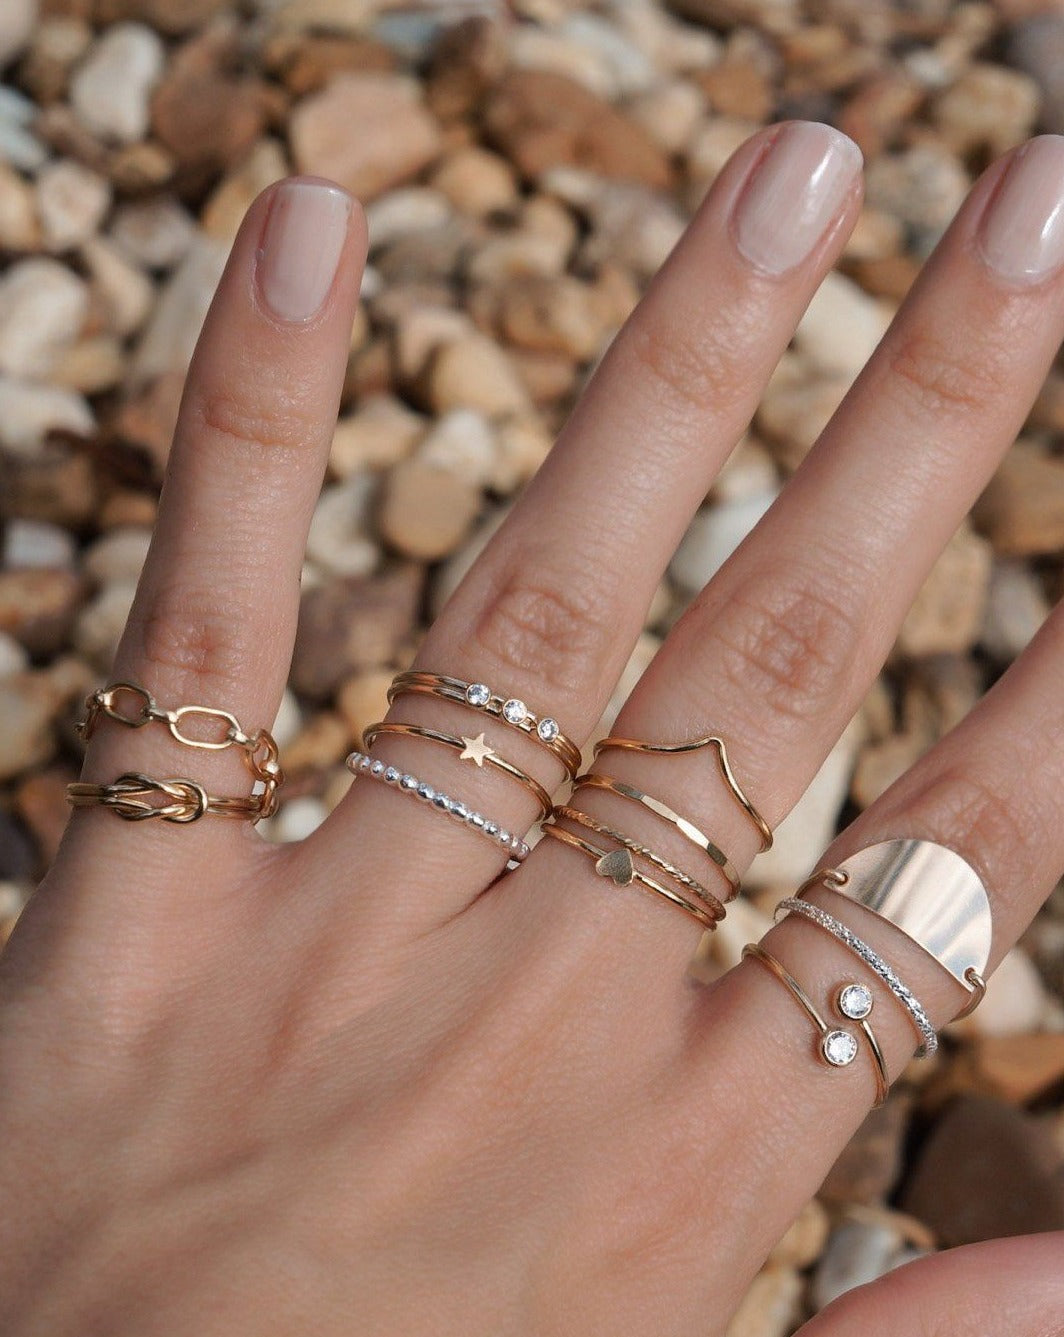 Netta Ring by KOZAKH. A soft chain ring crafted in 14K Gold Filled.